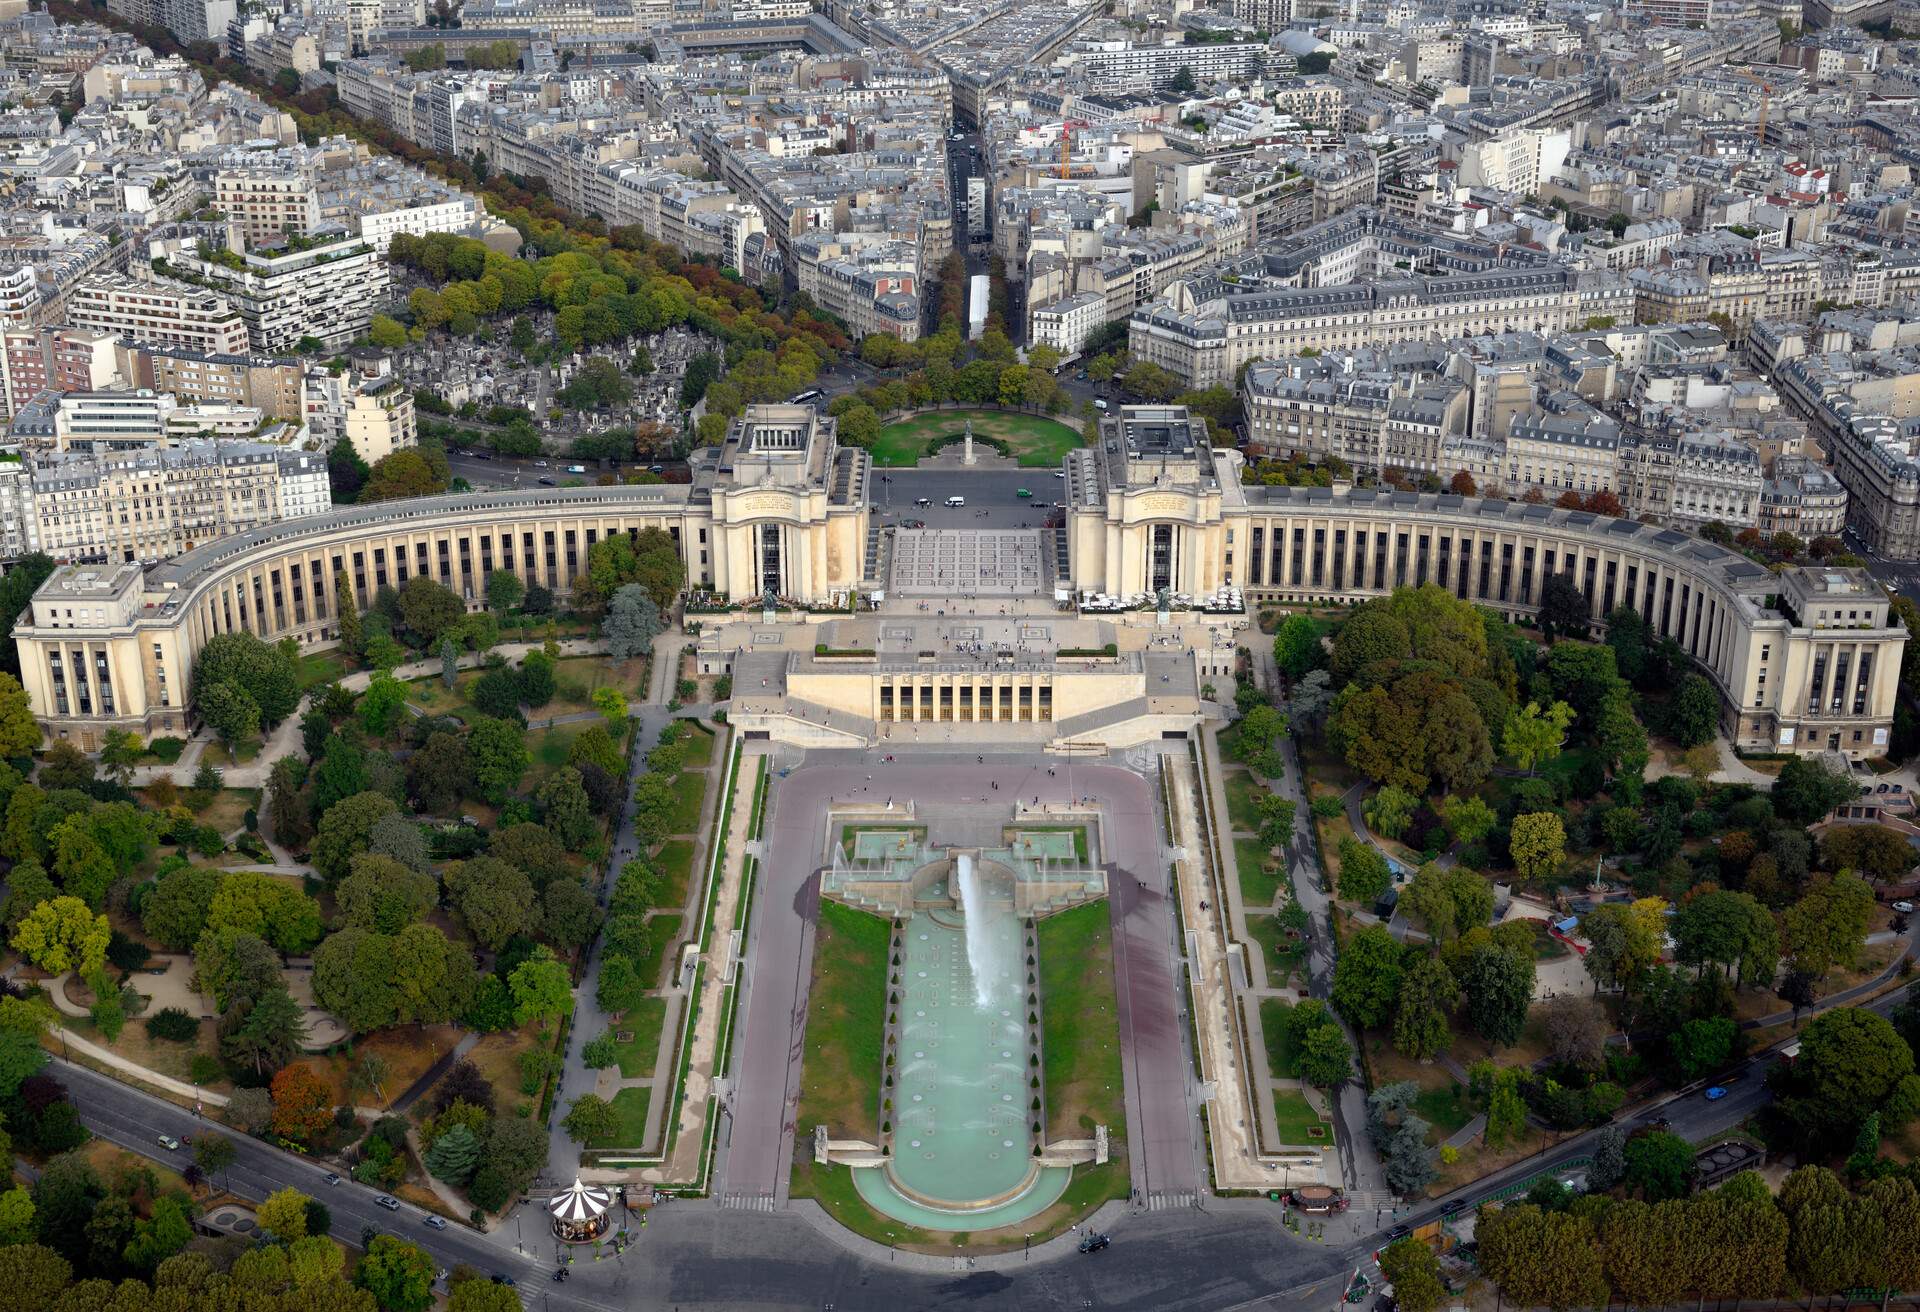 Photograph taken at an altitude of Three hundred and fourteen metres on a summer morning in August,  having travellede on the East wing lift up to the highest viewing platform on La Tour Eiffel located at Champ de Mars, 5 Avenue Anatole France, 75007 in Paris, France. Here we look over part of Paris including the fountains in Jardins du Trocadero towards Place  du Trocadero and Esplanade du Trocadero in Paris, France...The Eiffel Tower was originally designed by Gustave Eiffel and constructed between 1887-1889 as the entrance to the worlds fair in that year. It is now the worlds most visited paid monument, standing 324 metres tall (1,063ft) with three floors and eight lifts and was the tallest building in the world from 1889 to 1930.